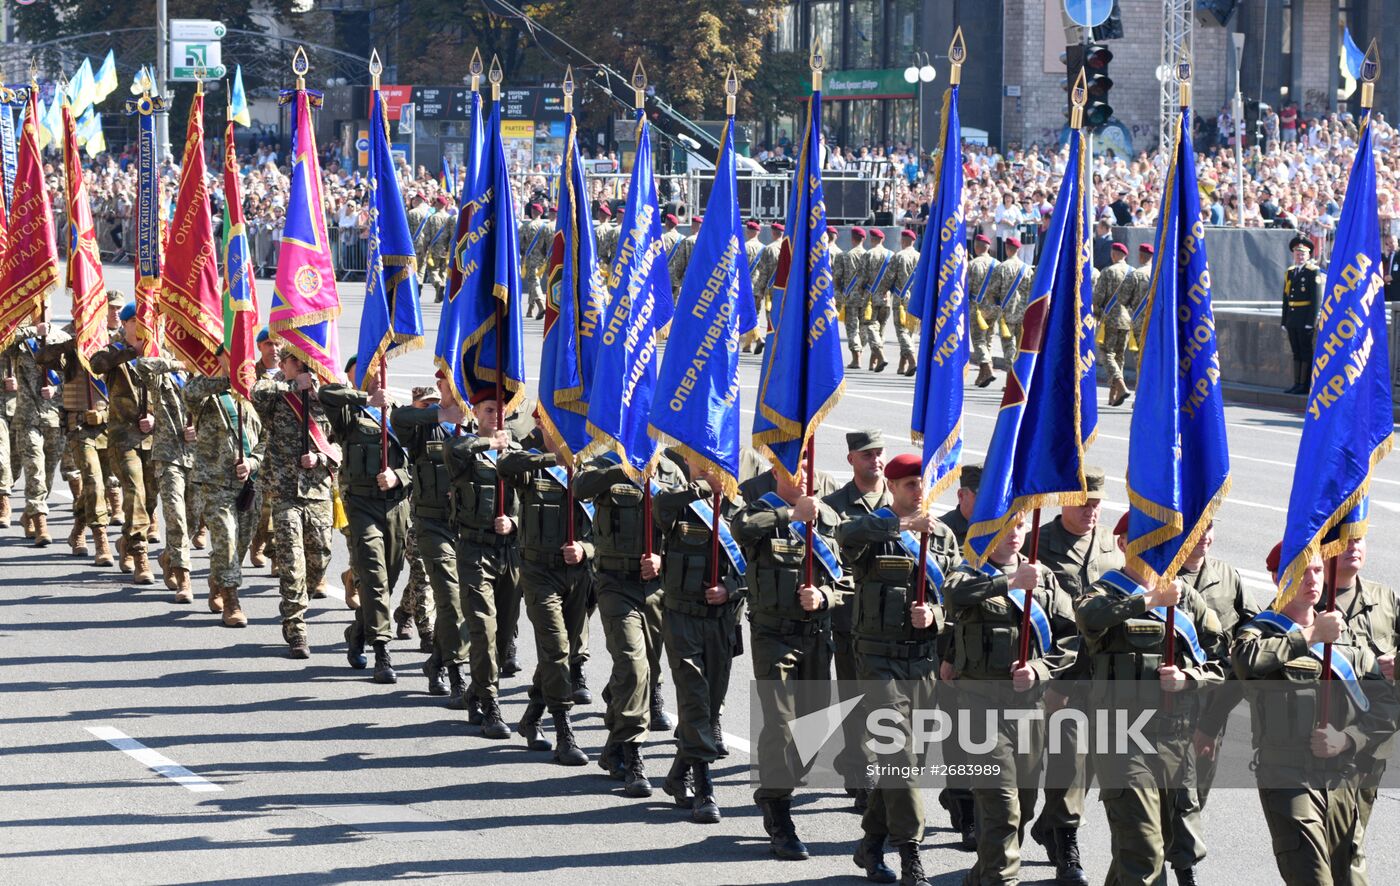 March on Independence Day in Kiev